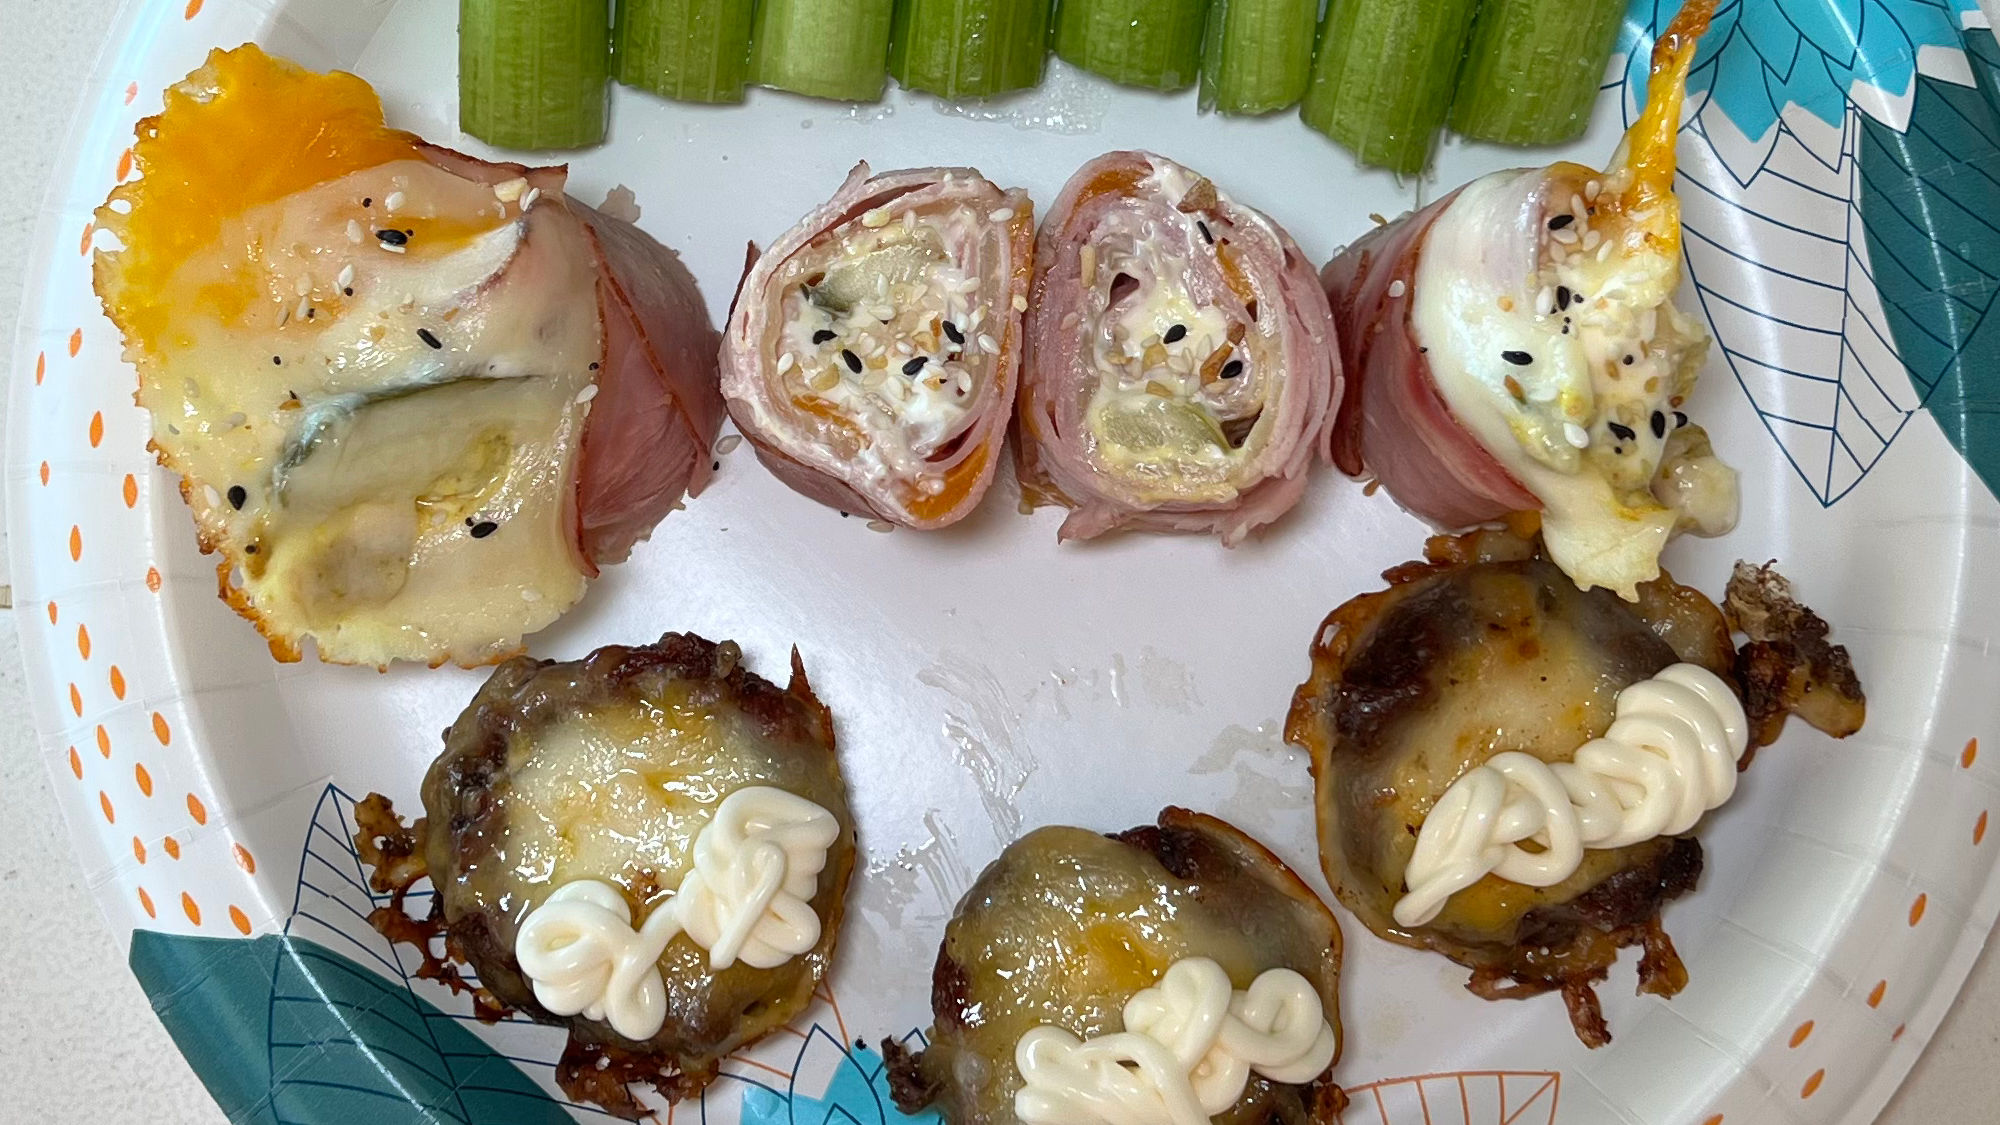 Baked Ham & Pickle Melts Muffin Cheeseburgers